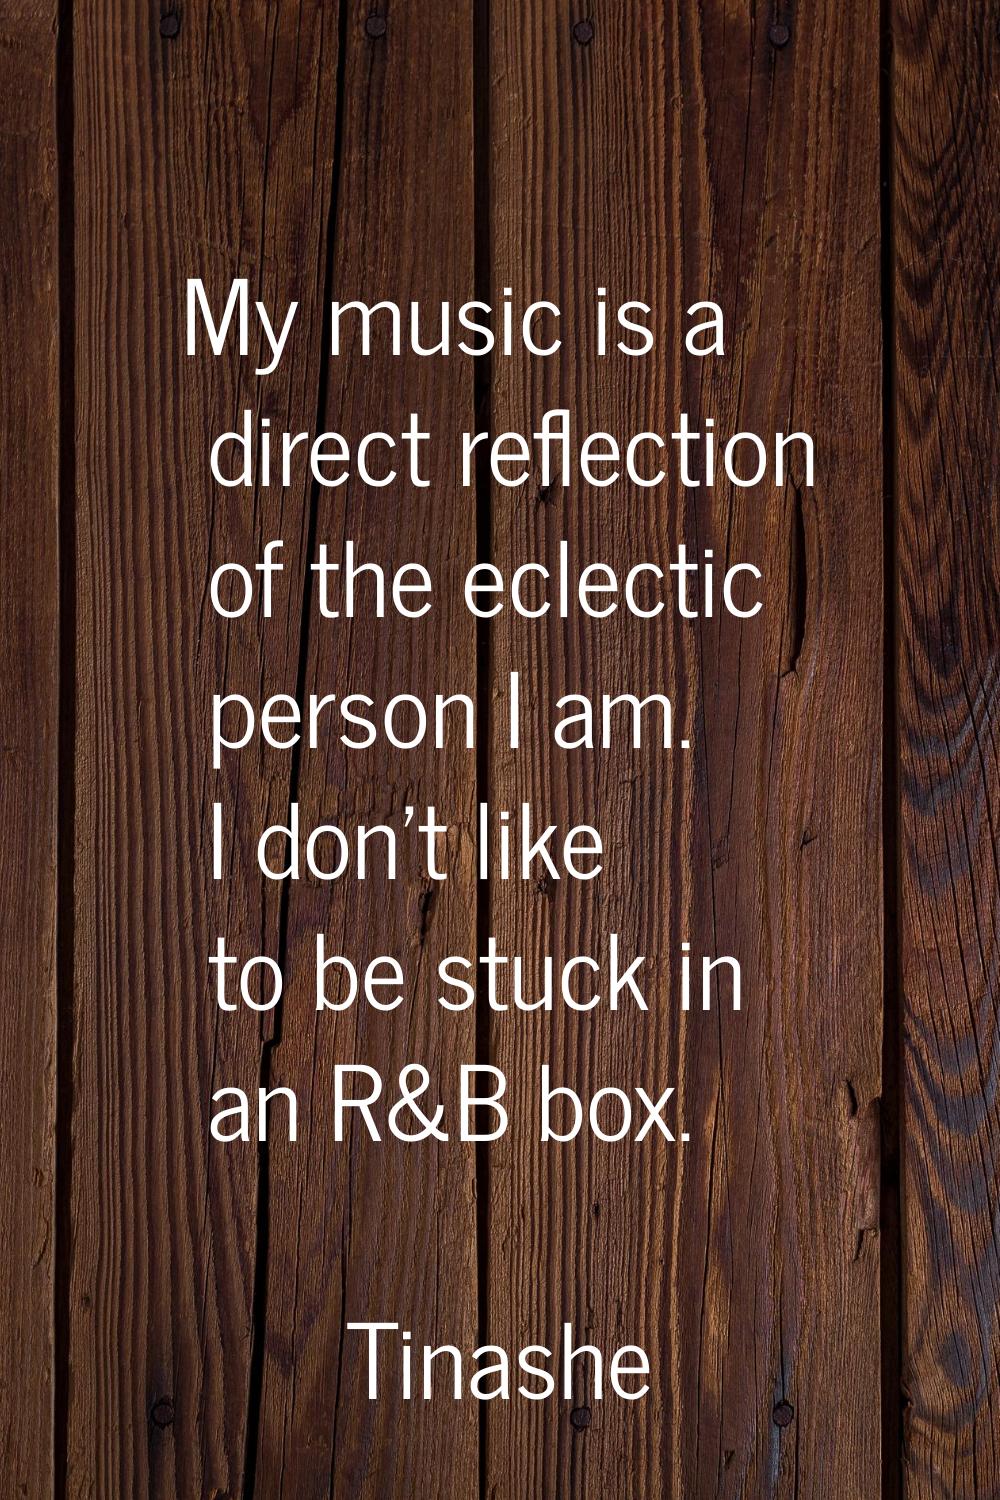 My music is a direct reflection of the eclectic person I am. I don't like to be stuck in an R&B box